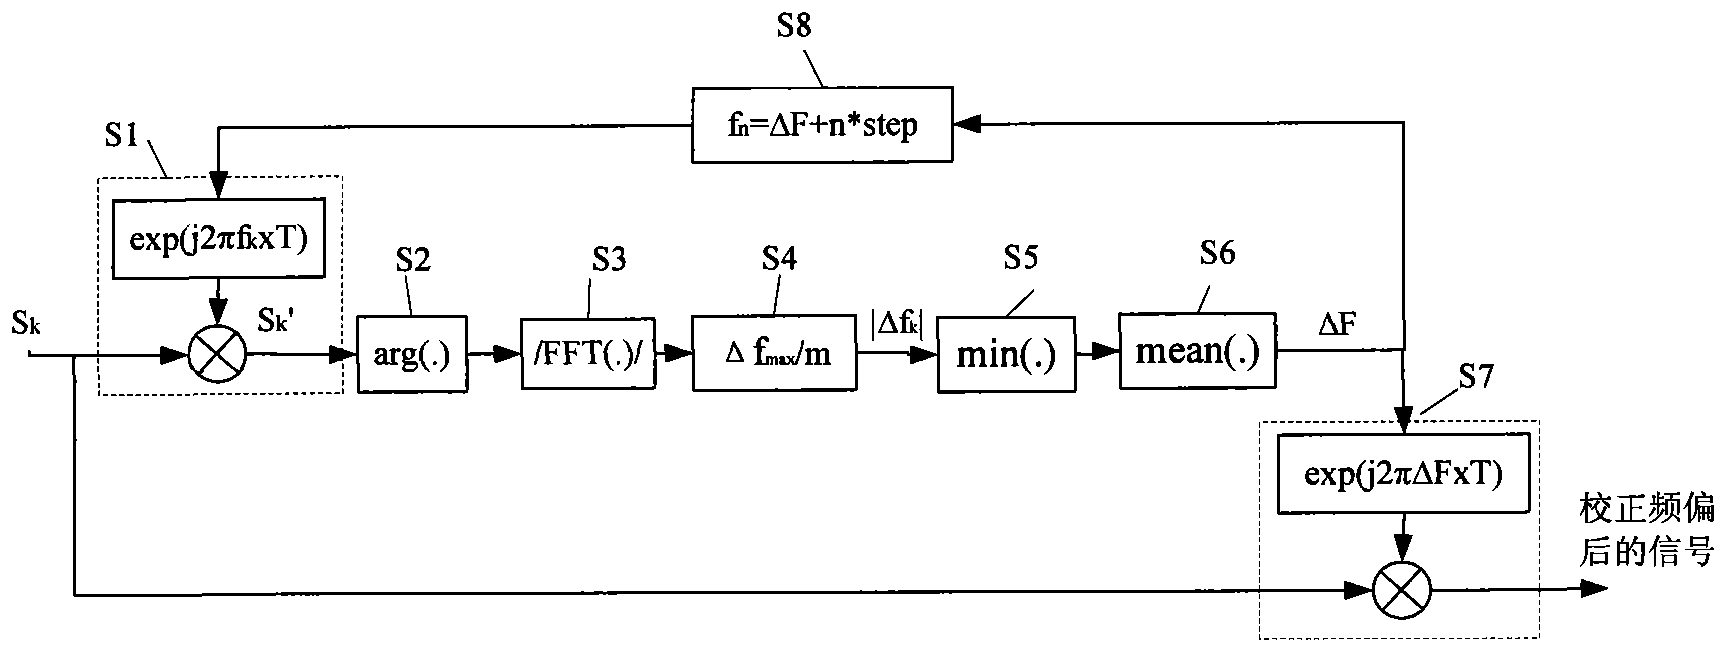 Carrier frequency correction method based on smooth tracking